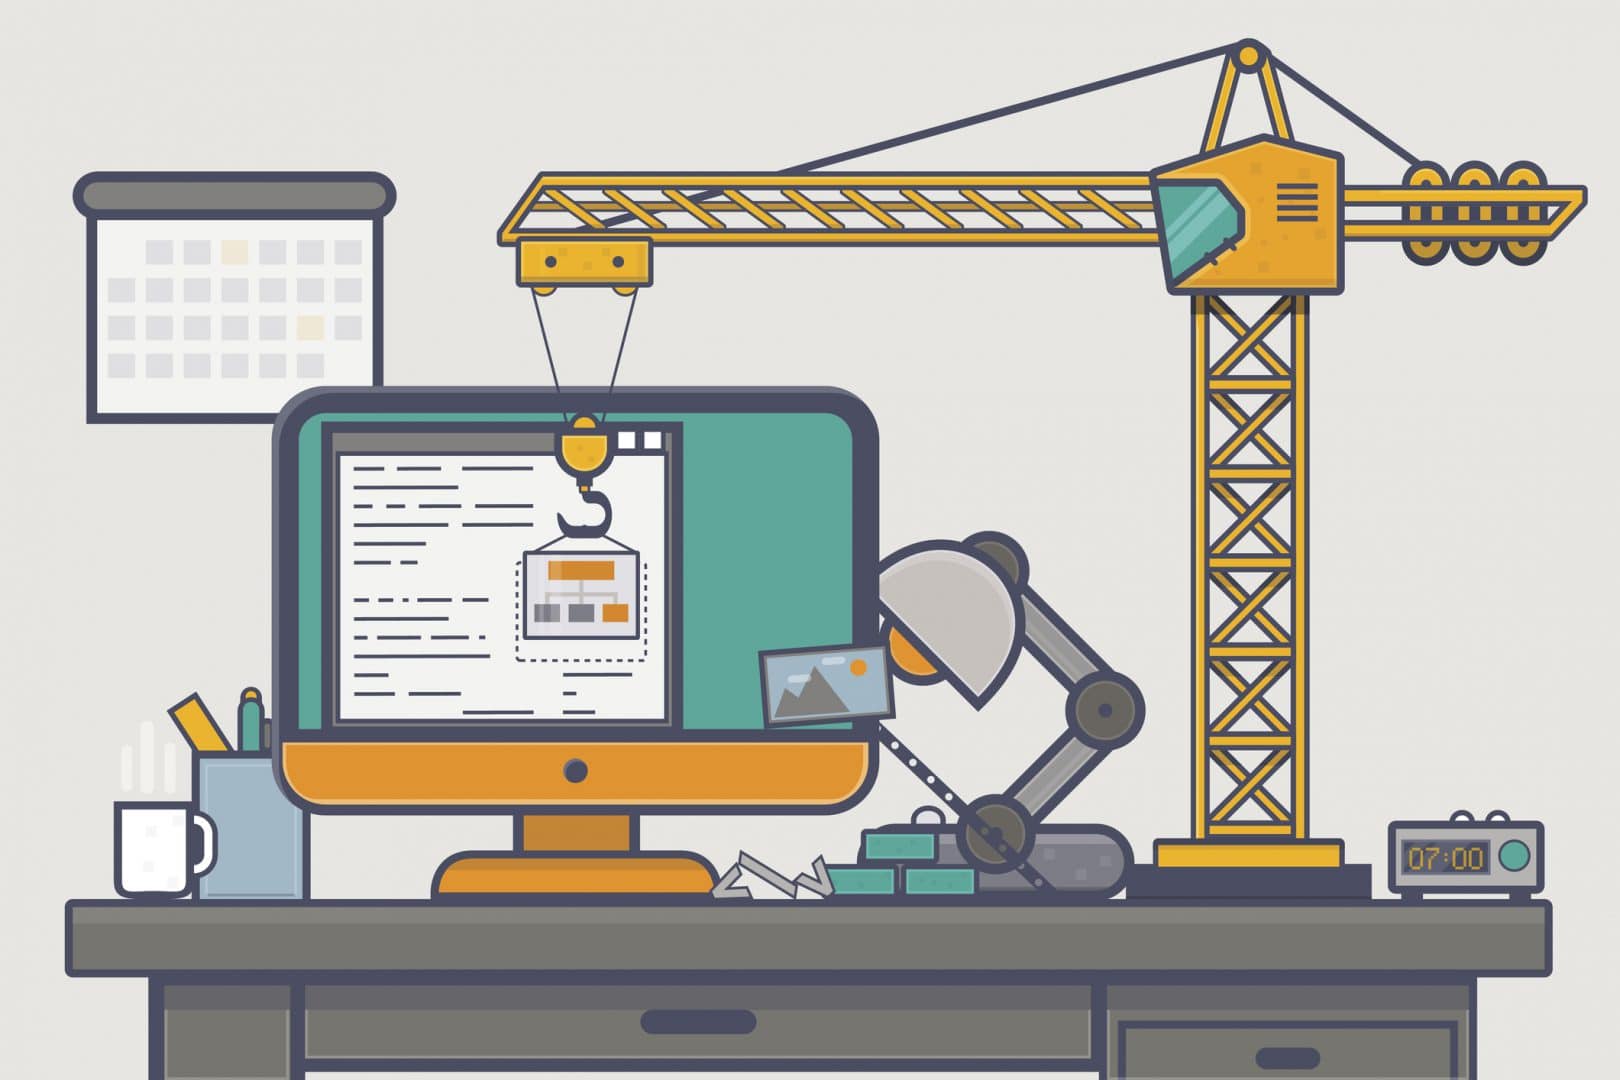 The Construction Management and Estimating Software